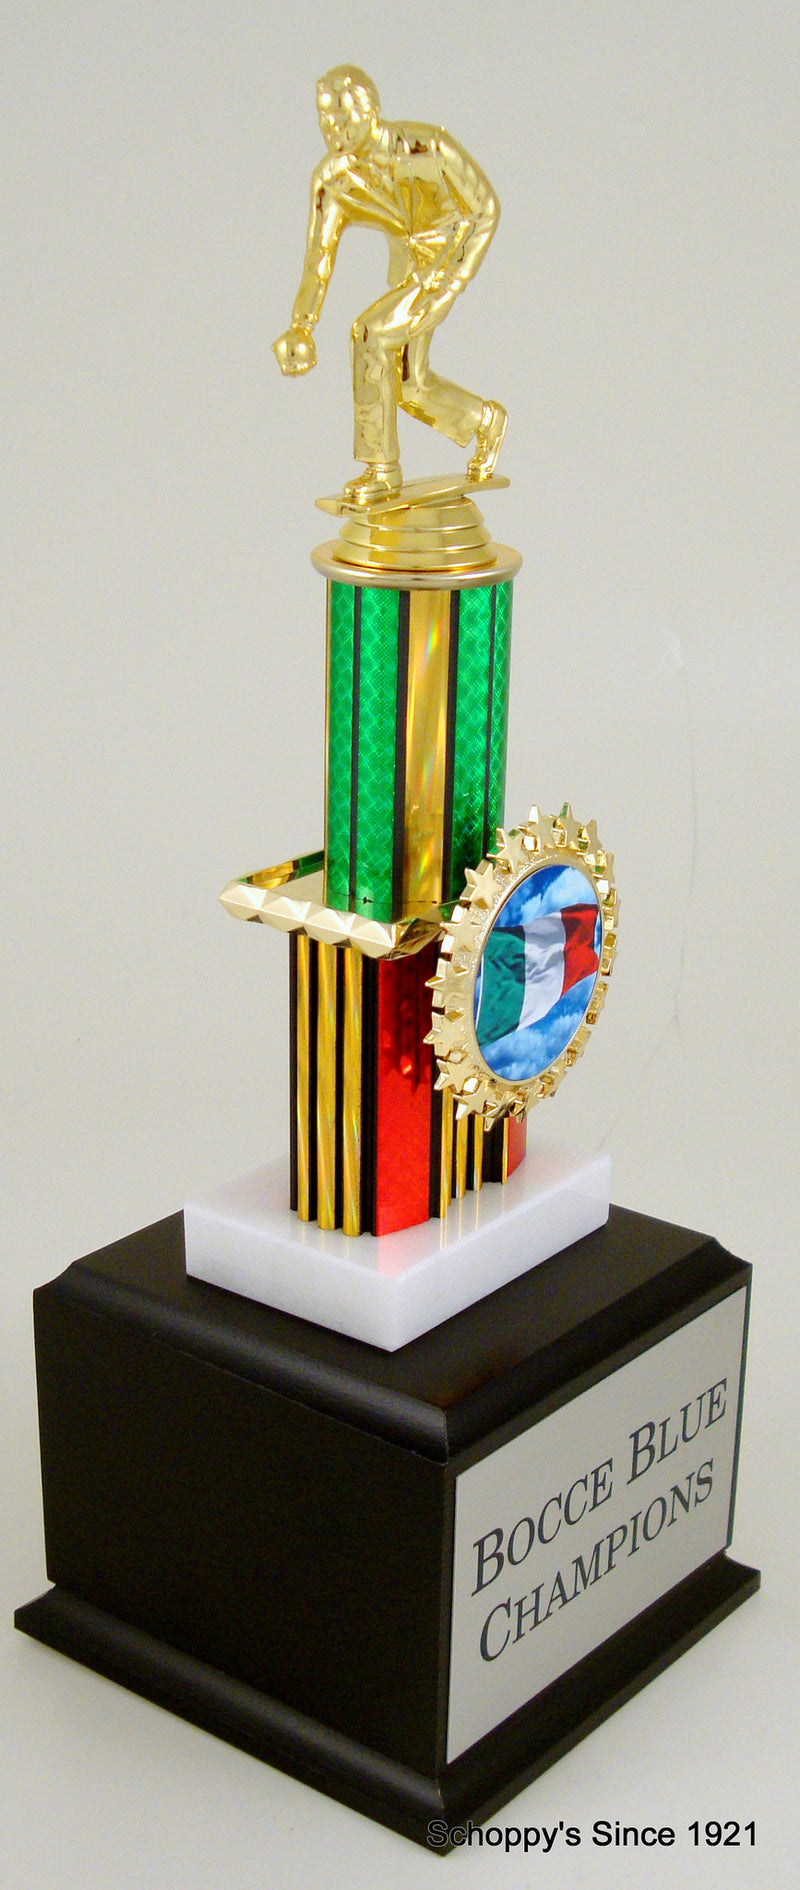 Bocce Ball Perpetual Trophy-Trophies-Schoppy&